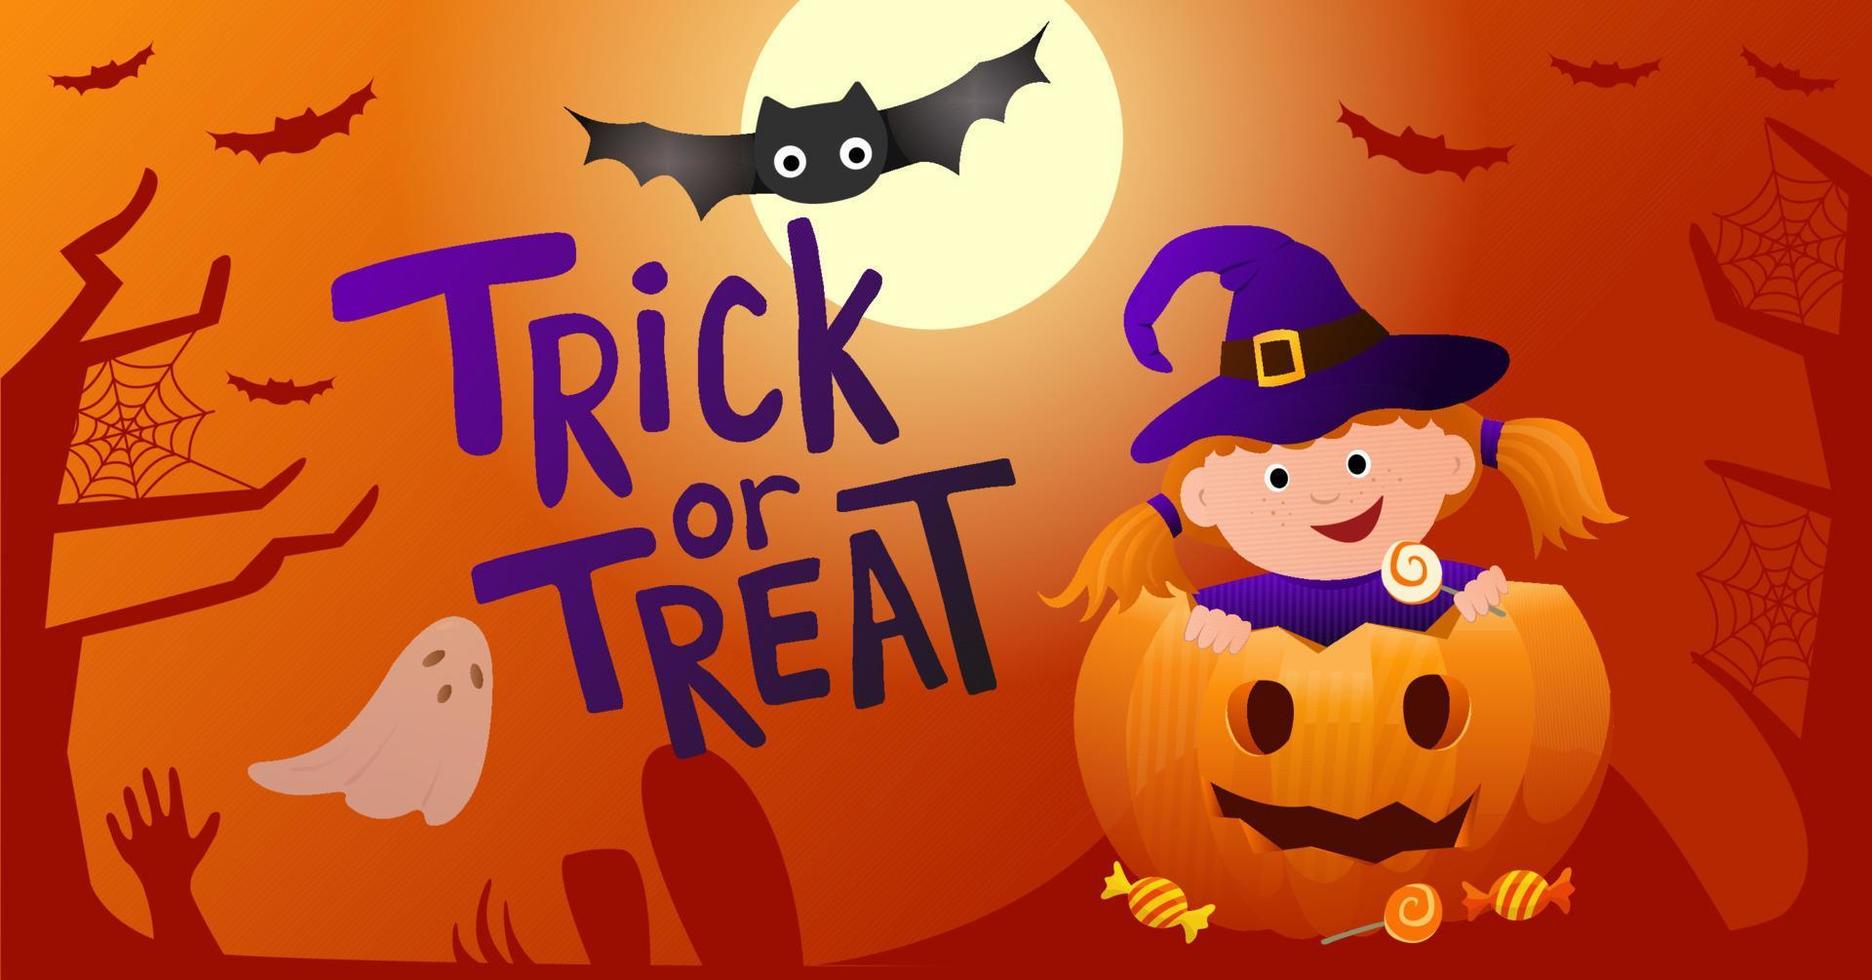 Halloween trick or treat banner design. Banner for social media post, flyer or poster. Trick or treat with cute witch girl, candy, pumpkin and bats on orange background. Spooky vector illustration.